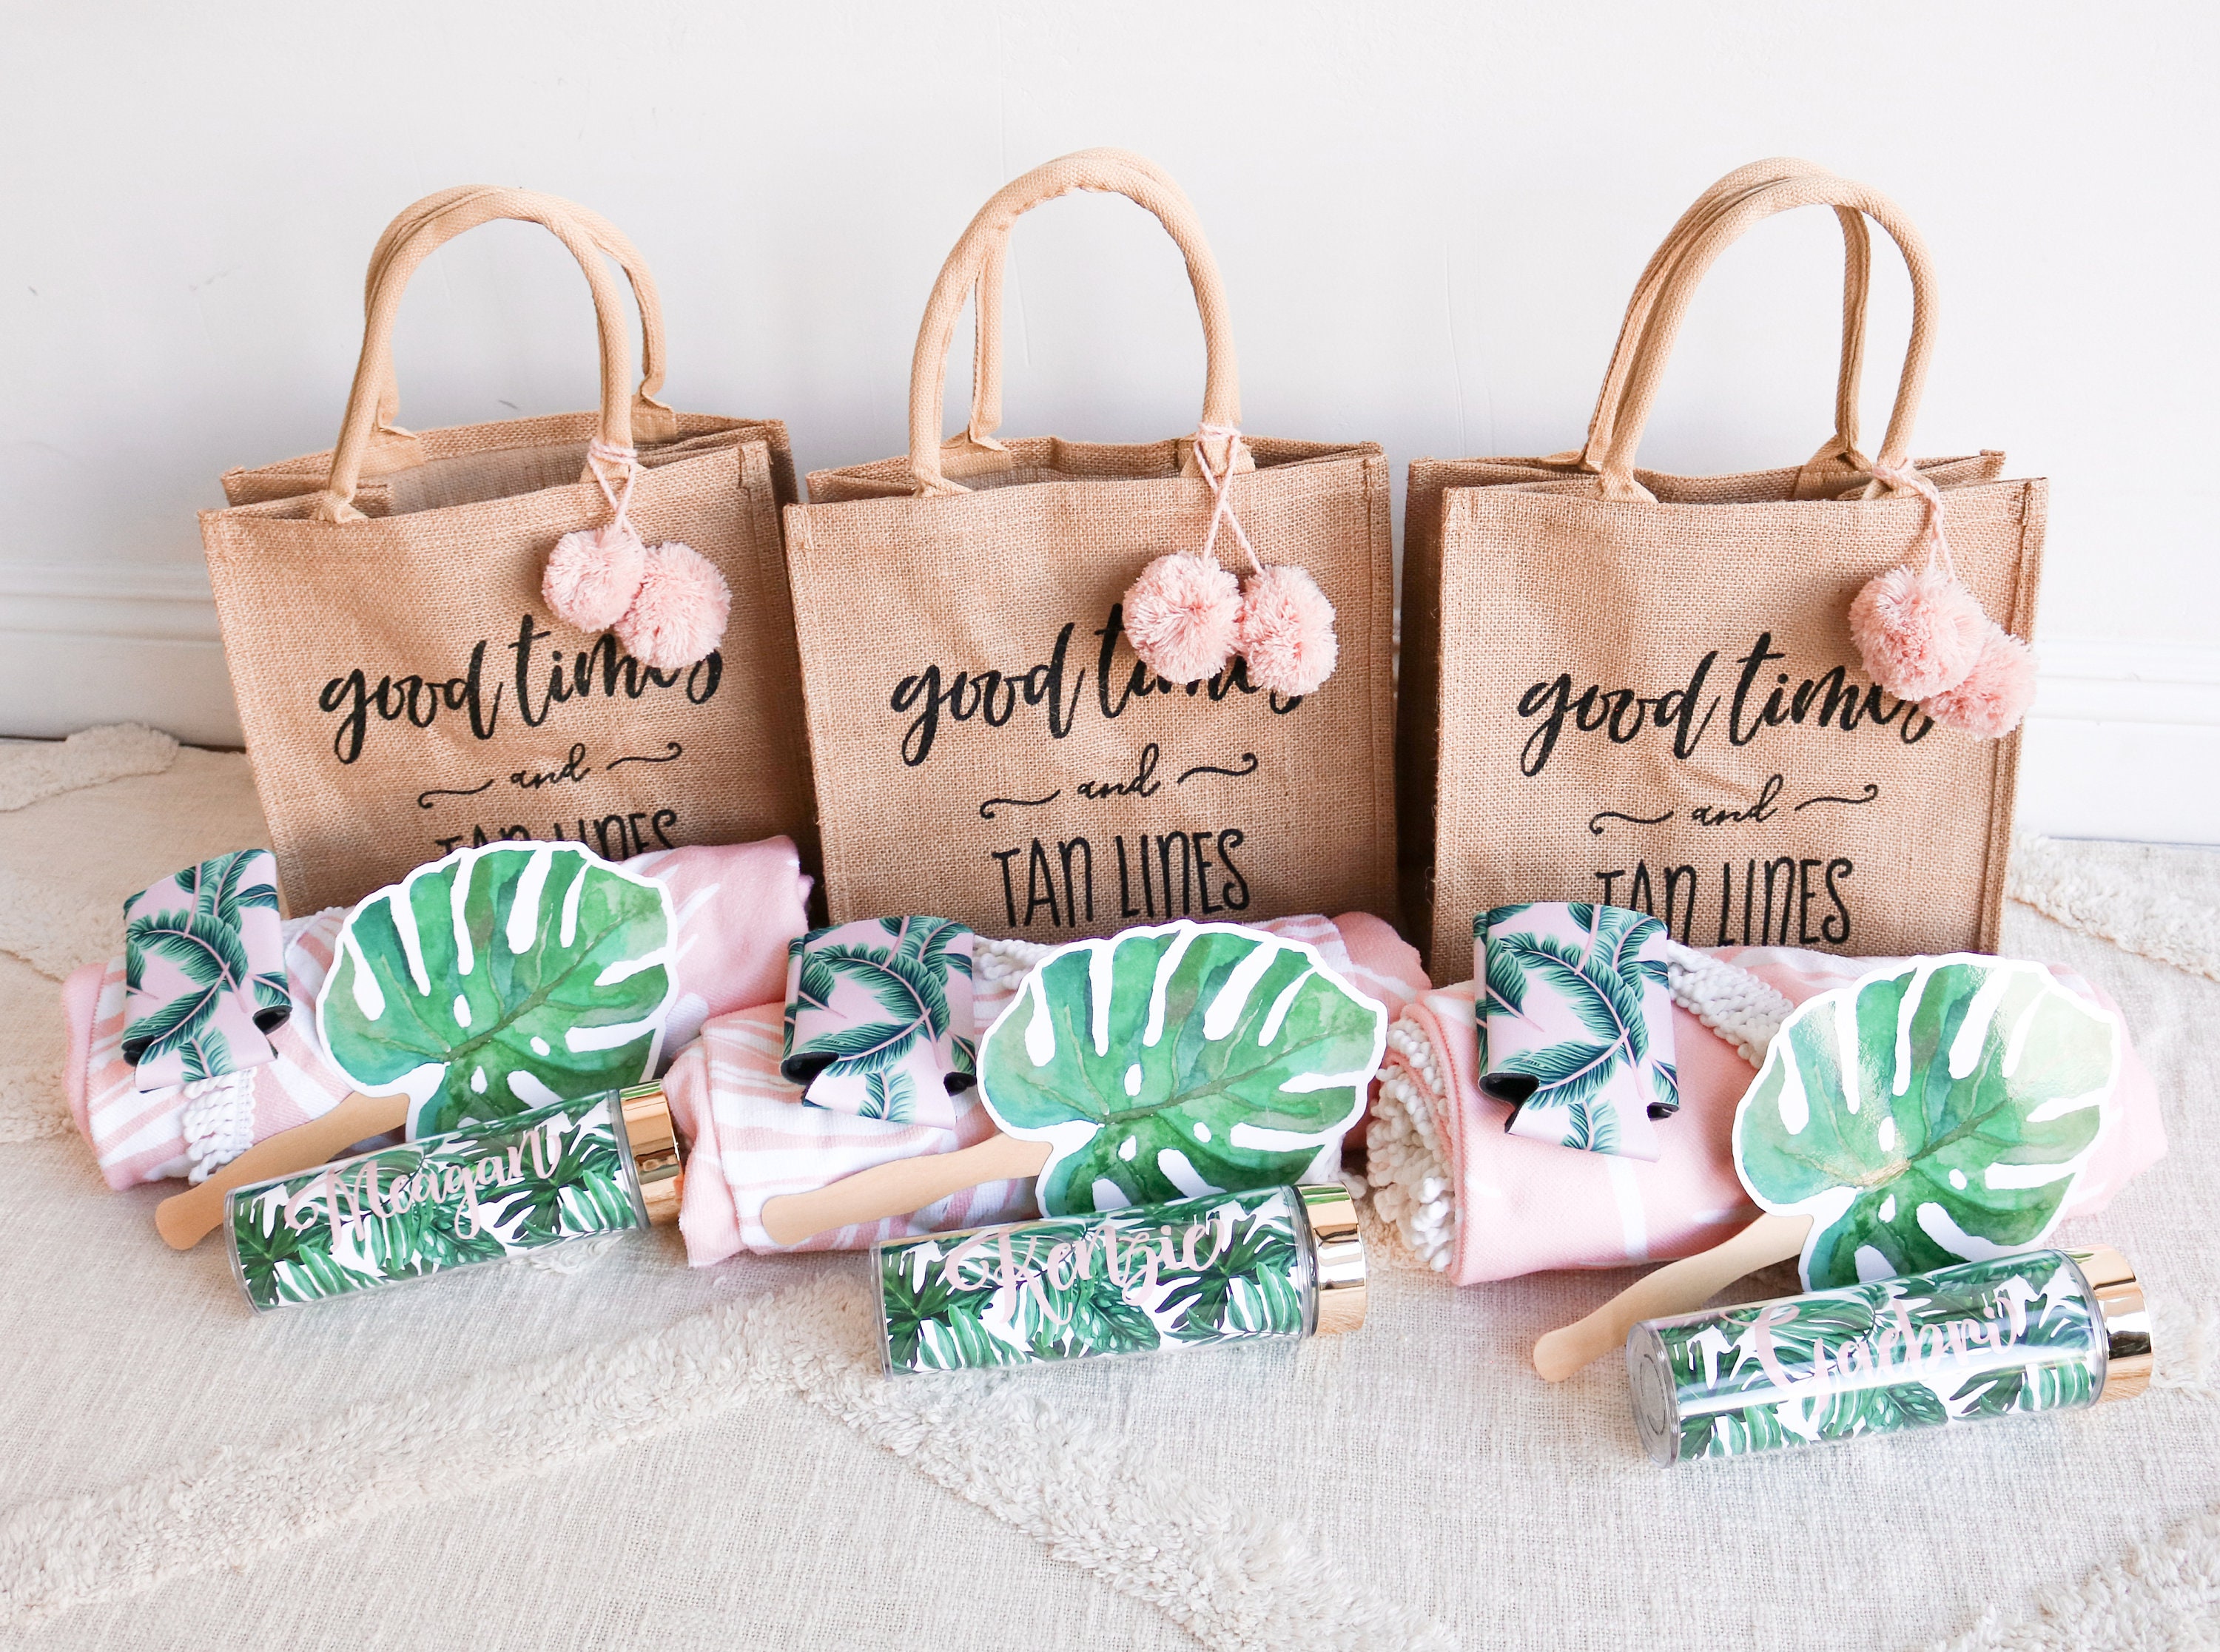 Bachelorette Party Bags Bachelorette Party Favors Beach Bachelorette Ideas  Bachelorette Party Gift Bags Good Times and Tan Lines (EB3259T)